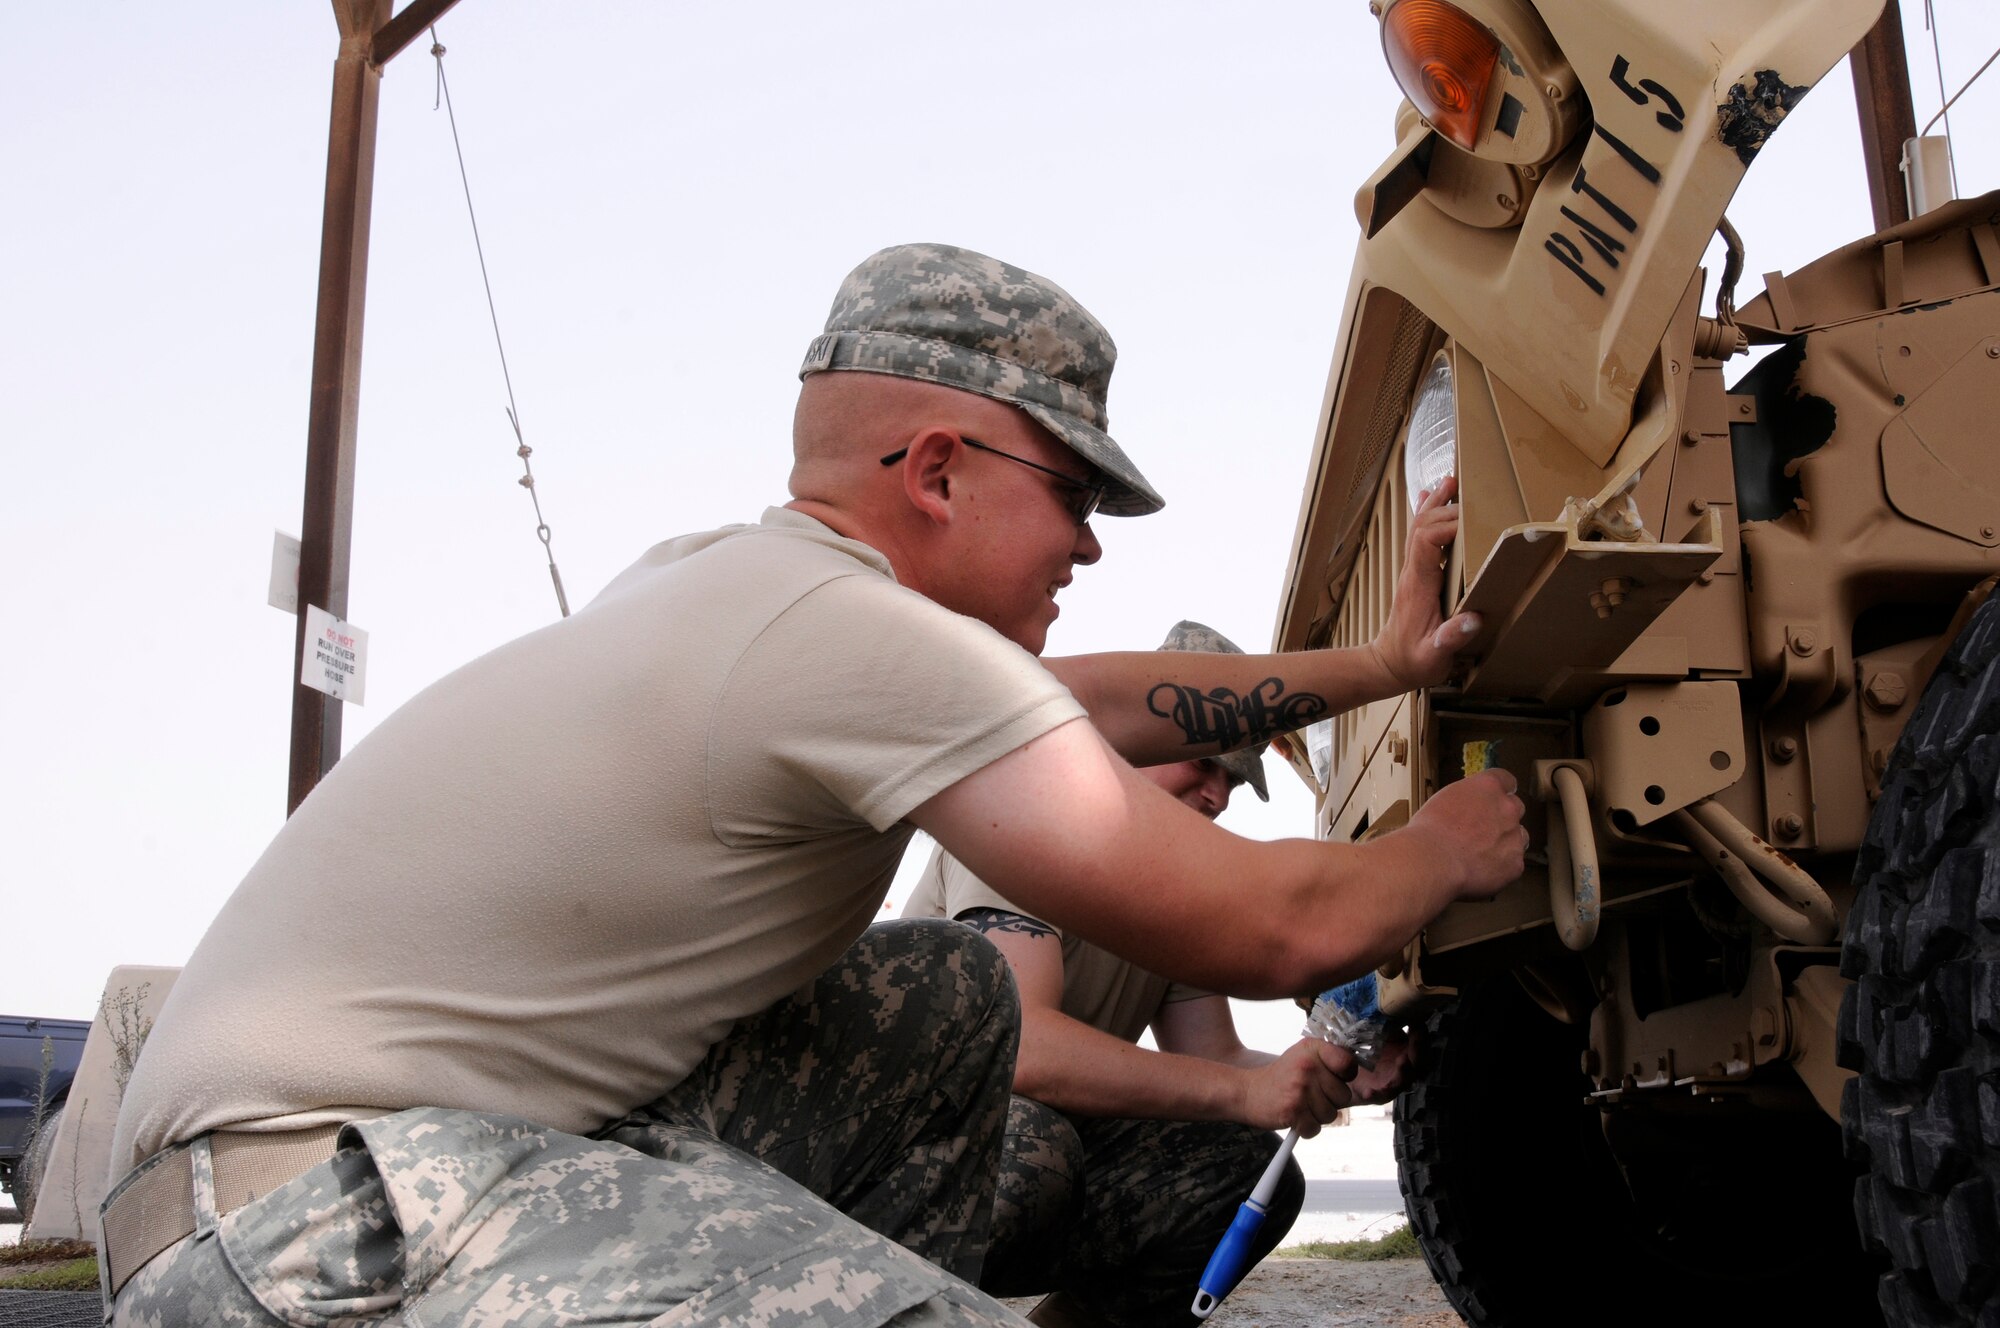 Spc. Josh Polonowski, A 2-43, Air Defense Artillery from Fort Bliss, Texas, uses a scrubbing pad and Private 1st Class Kyle Page, A 2-43, ADA, uses a toilet brush on the front of a Battery Command Post (BCP) vehicle Aug. 7, 2008.  The soldiers are cleaning all dirt, mud, grease and oils from the BCP in preparation for shipping it back to Texas from an undisclosed airbase in Southwest Asia.  (U.S. Air Force photo by Tech. Sgt. Michael Boquette/RELEASED)